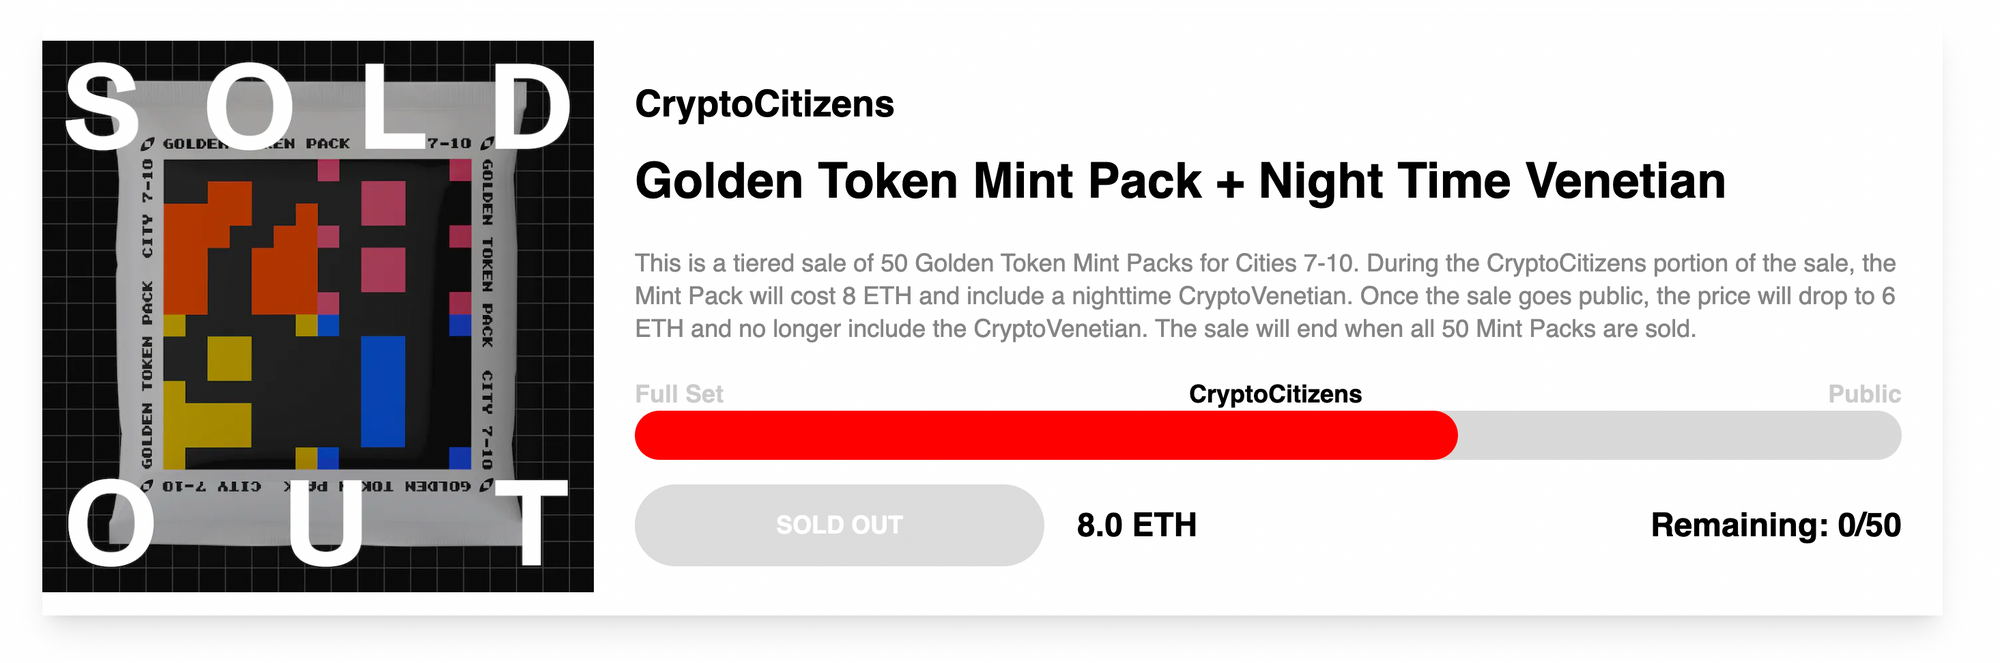 This interface shows a fixed price sale with three phases: Full Set, CryptoCitizen, and Public. The sale sold out before making it to the Public phase of the sale, to the benefit of those able to purchase in earlier phases.